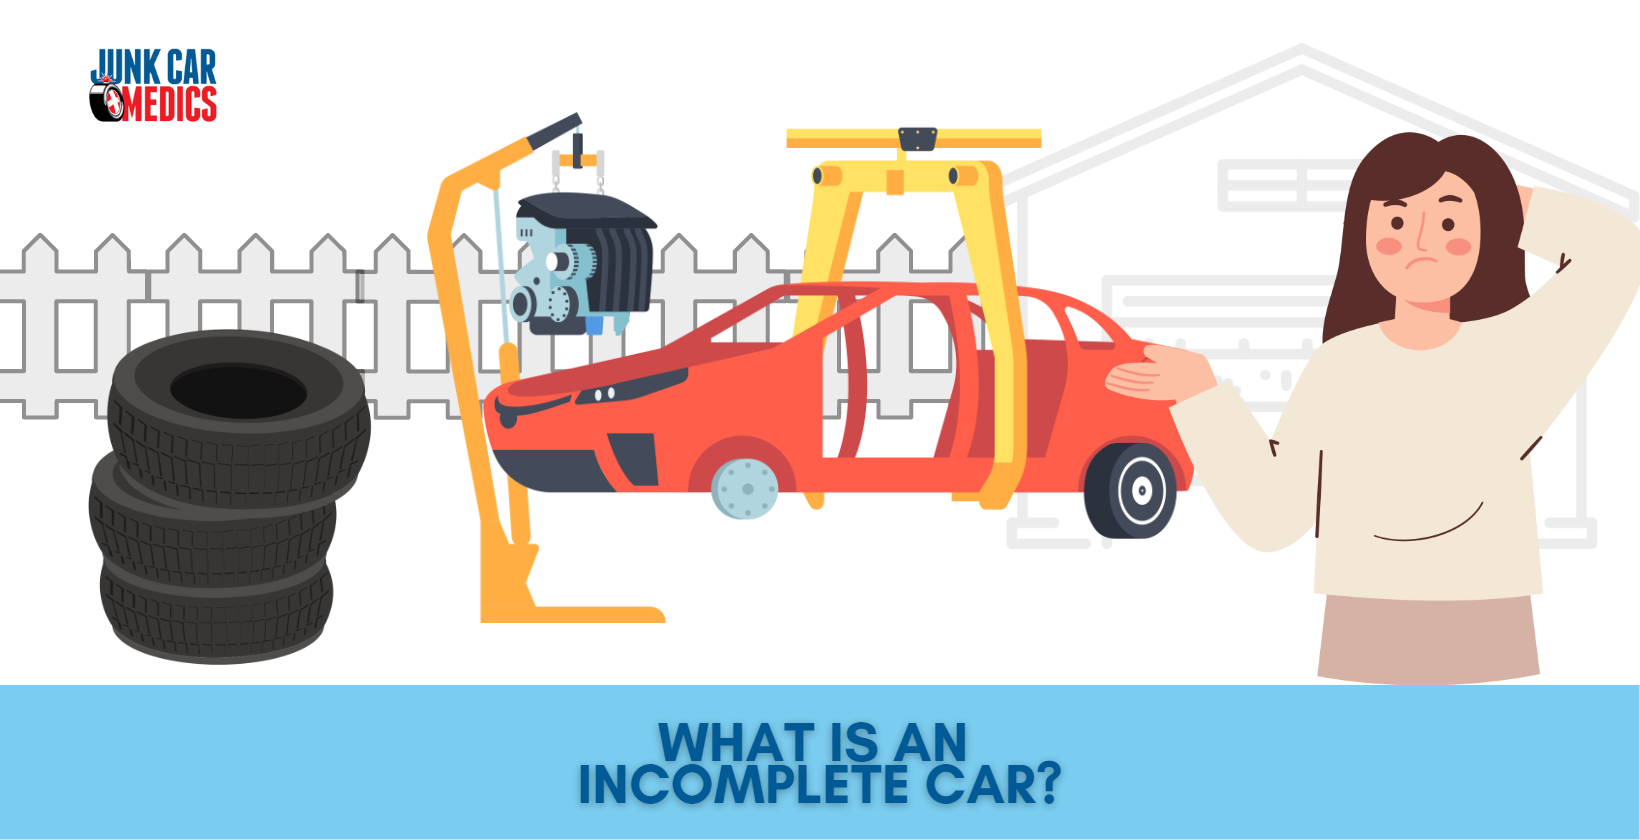 What is an Incomplete Car?